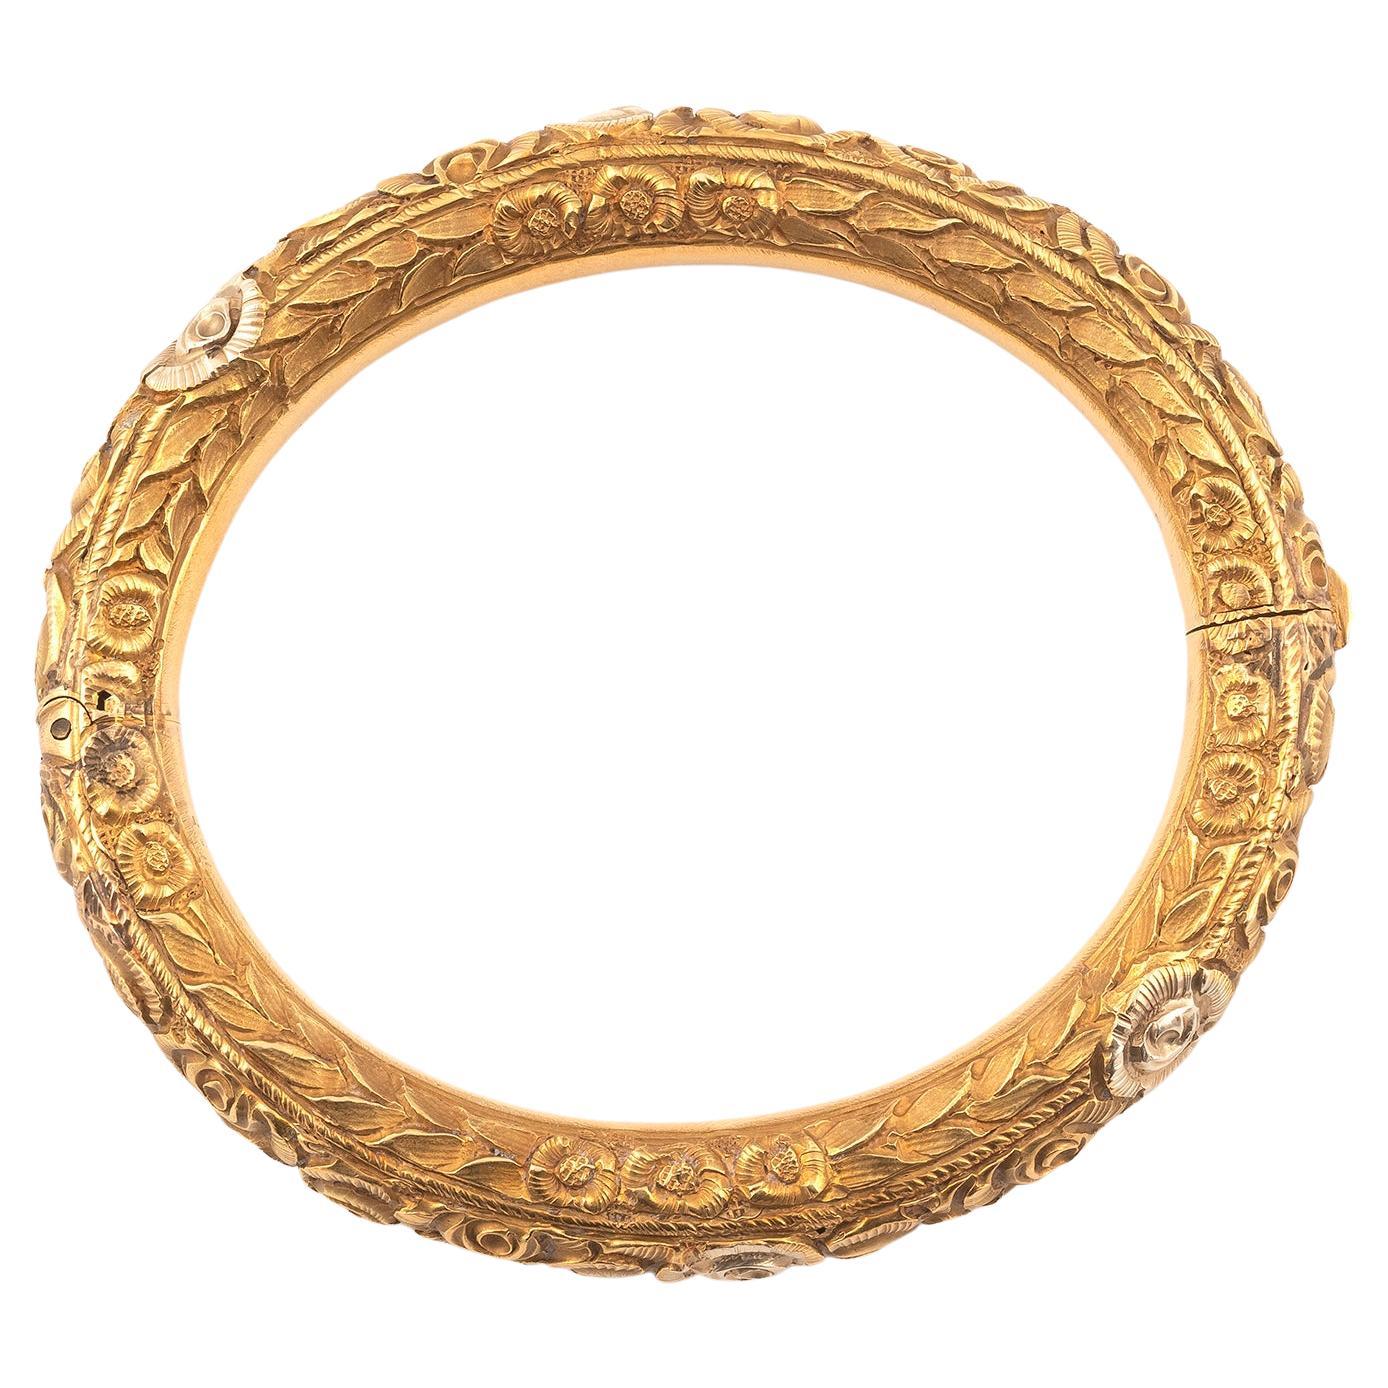 The hollow, hinged bangle with handcrafted floral design; weighing approximately: 22,37 gram;
Wide 1,1cm
Size: 6,1cm.